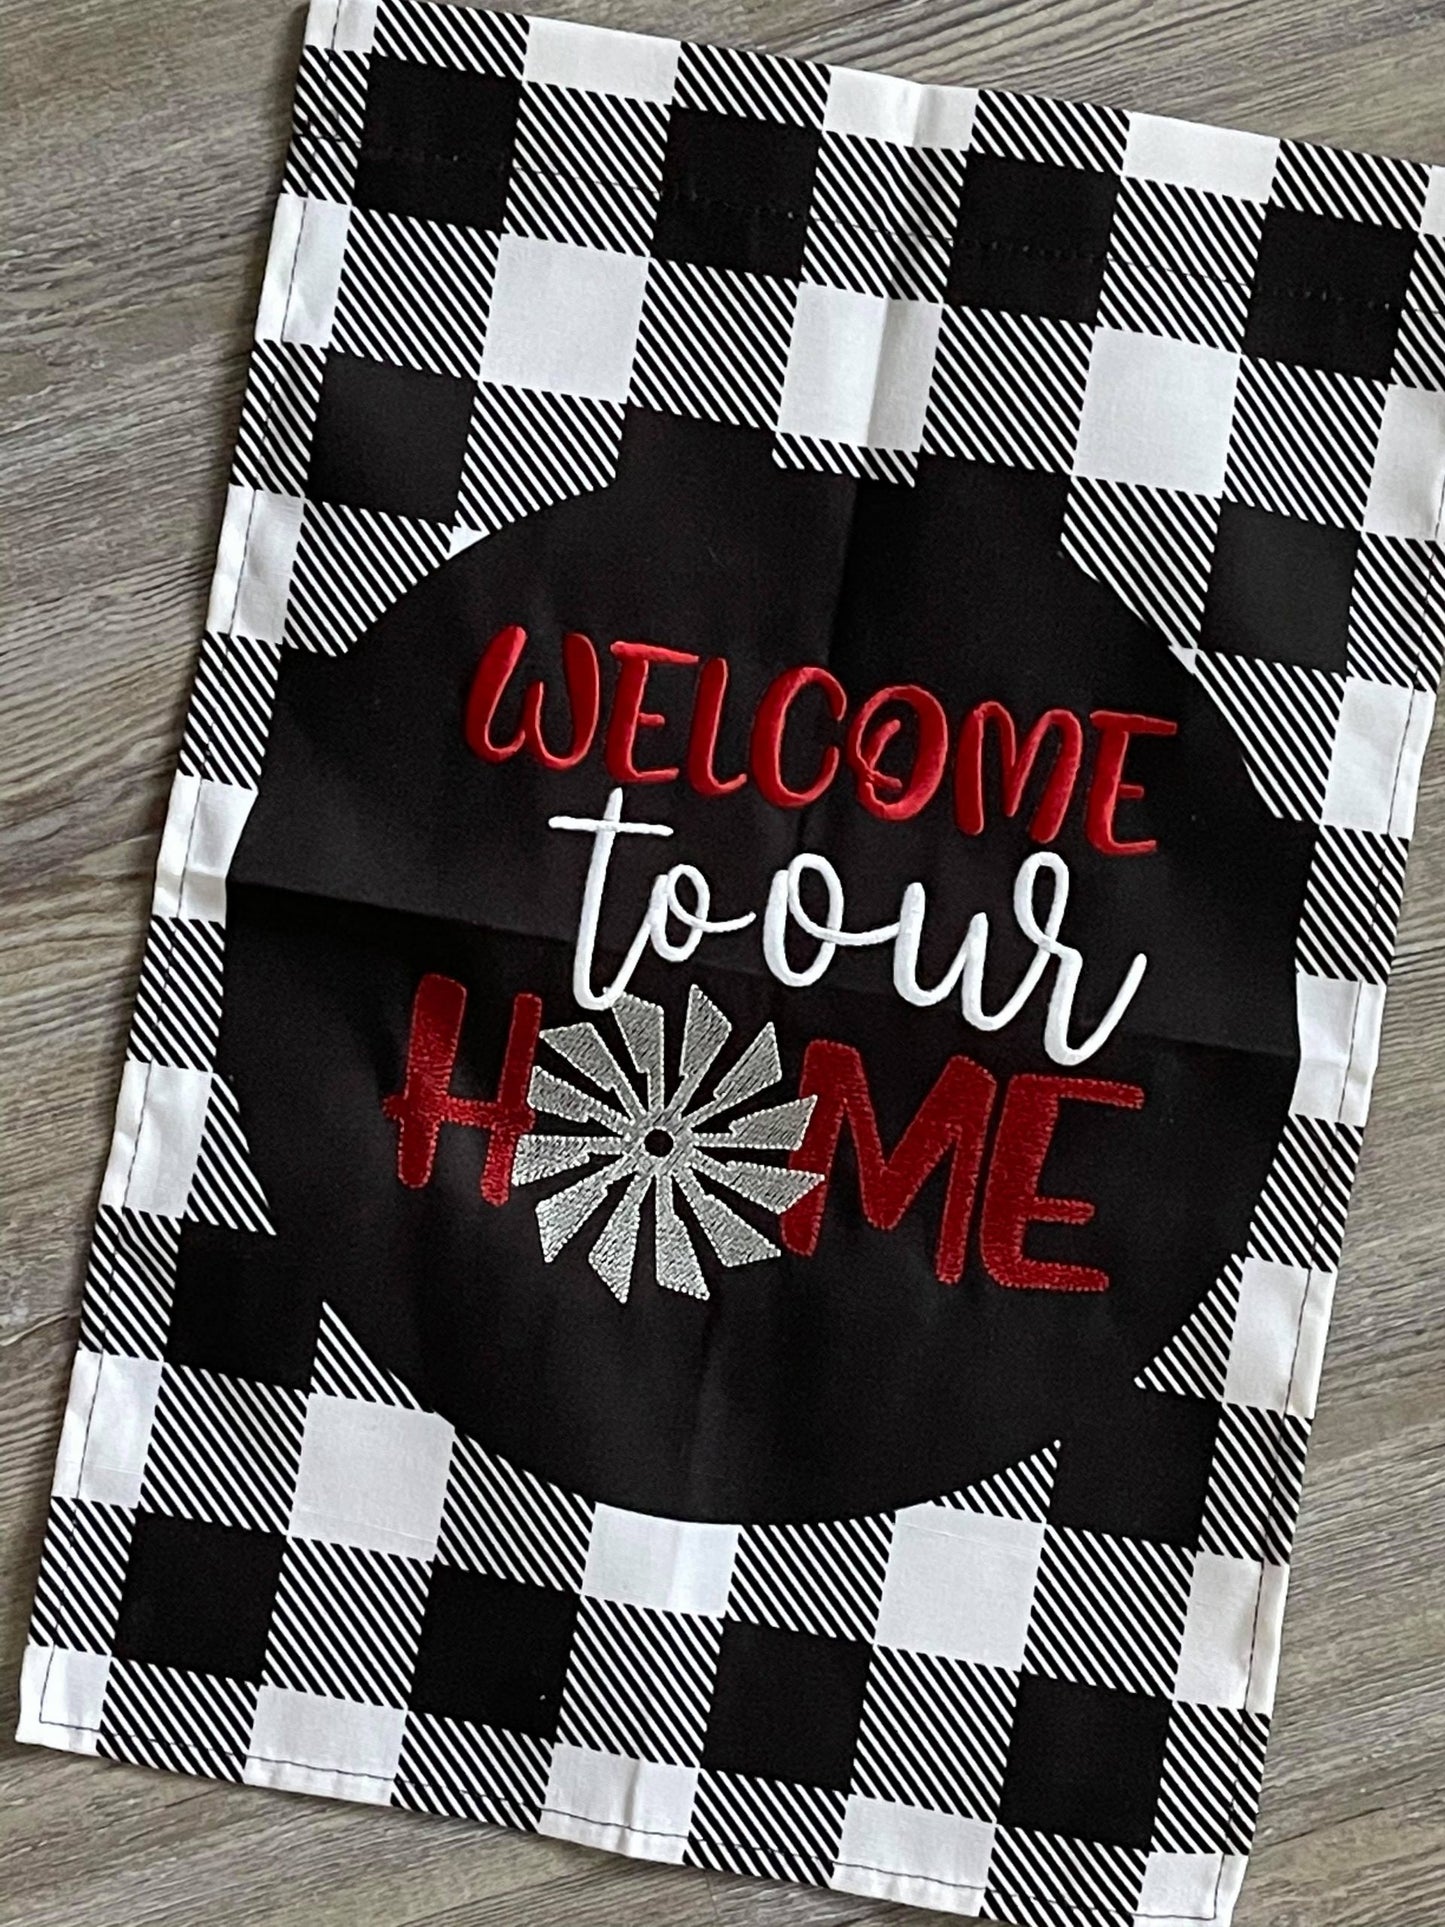 Welcome To Our Home - 4 sizes- Digital Embroidery Design